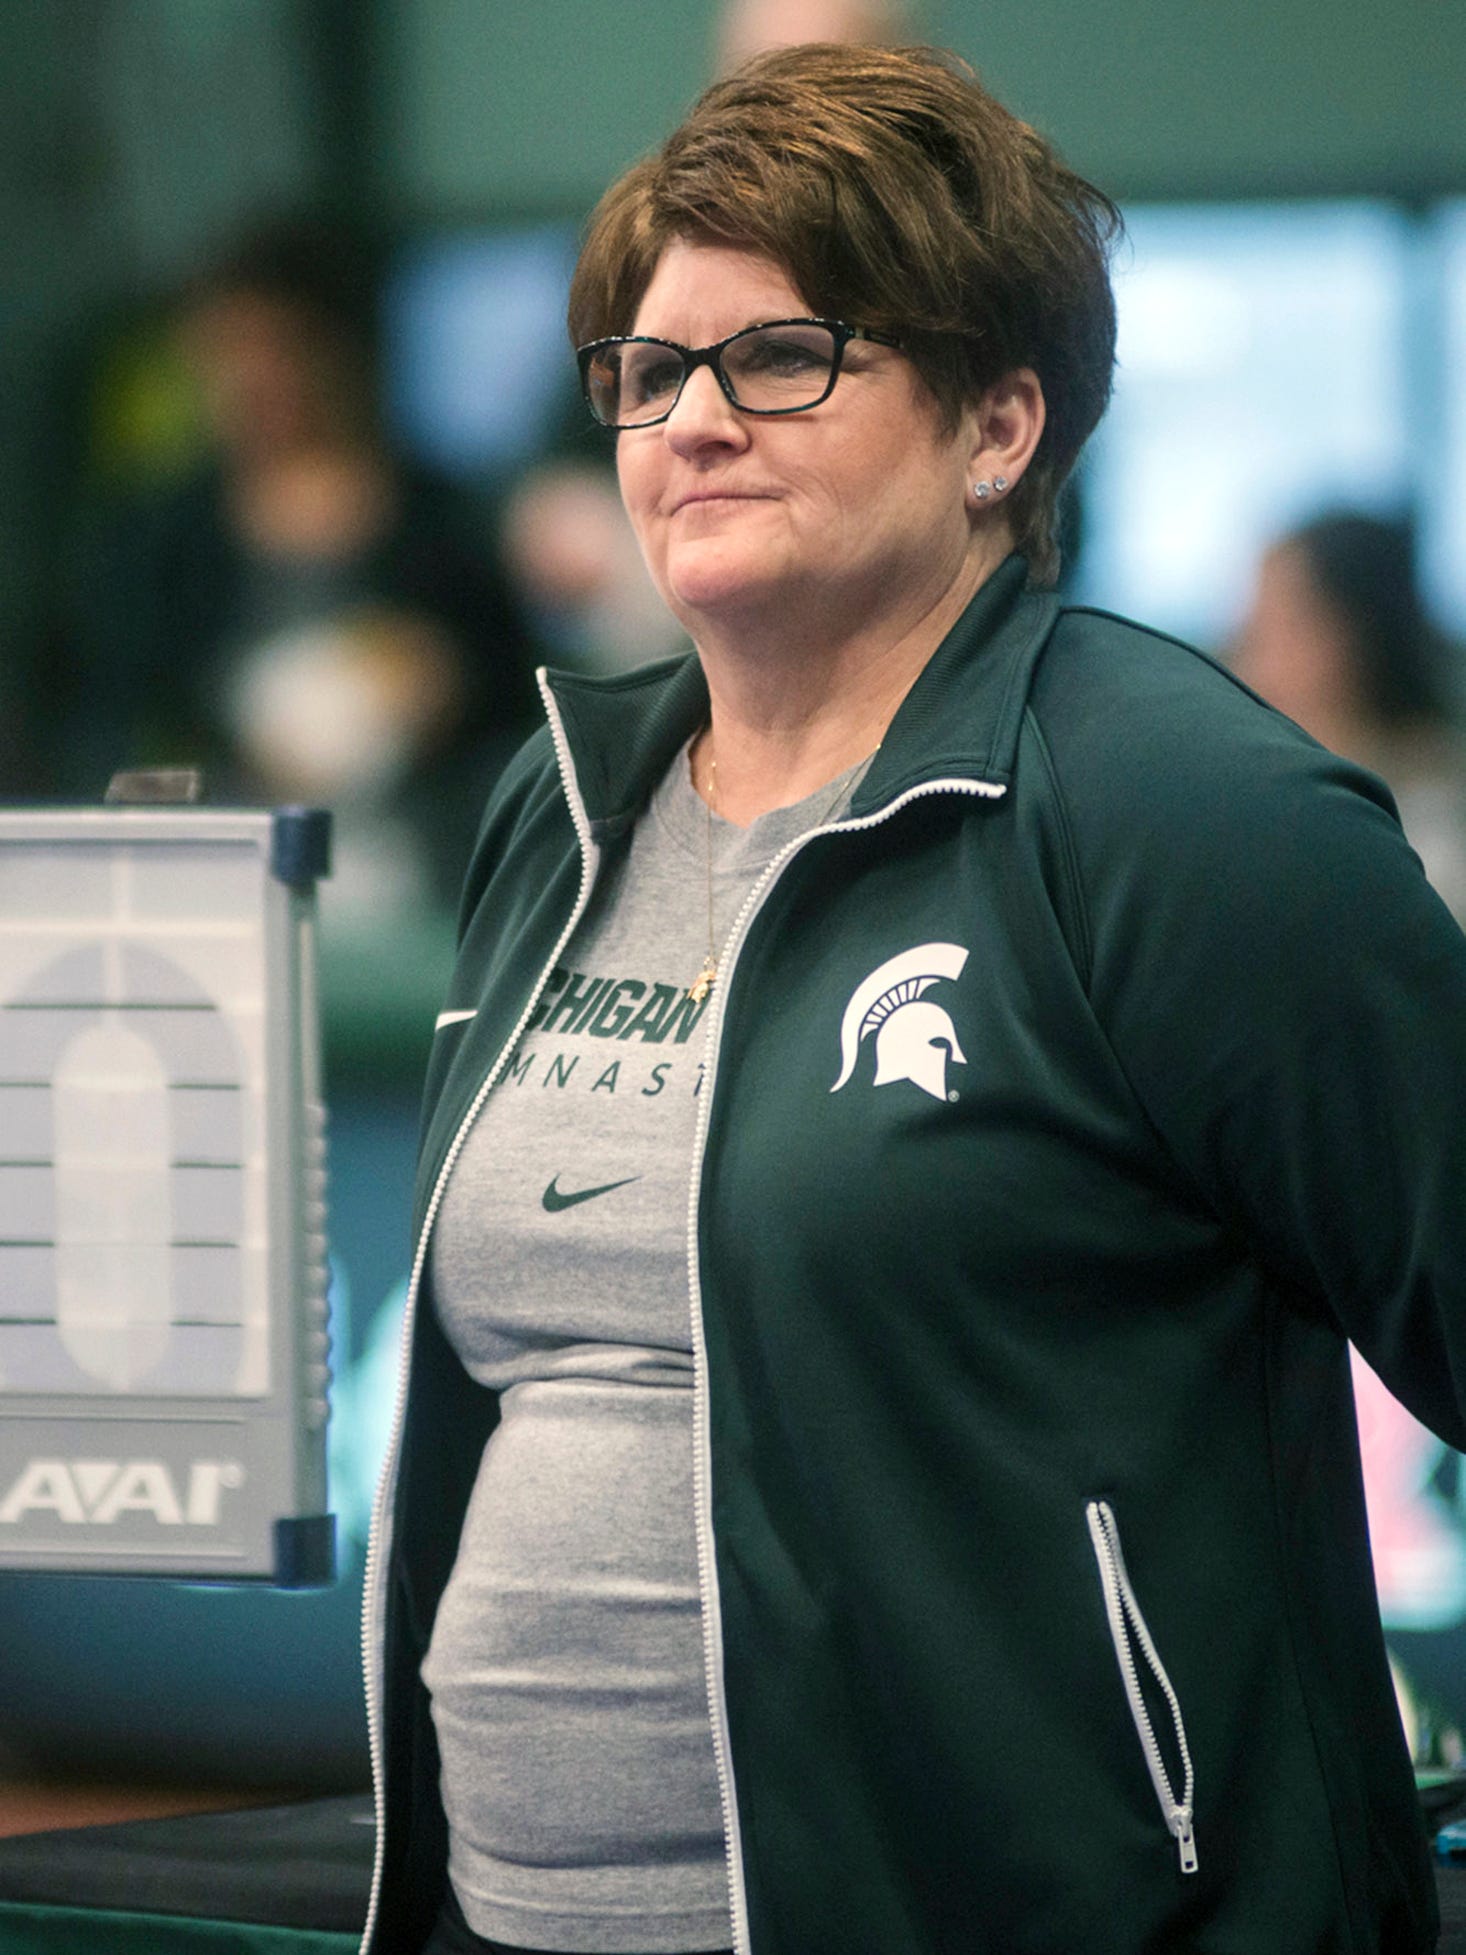 At MSU, a few other women complained to another coach or a doctor about Nassar after Larissa Boyce went to Michigan State University gymnastics head coach Kathie Klages. Then, in 2004, one young woman went to Meridian Township police, who questioned Nassar, but charges were not sent to the prosecutor, according to published reports.